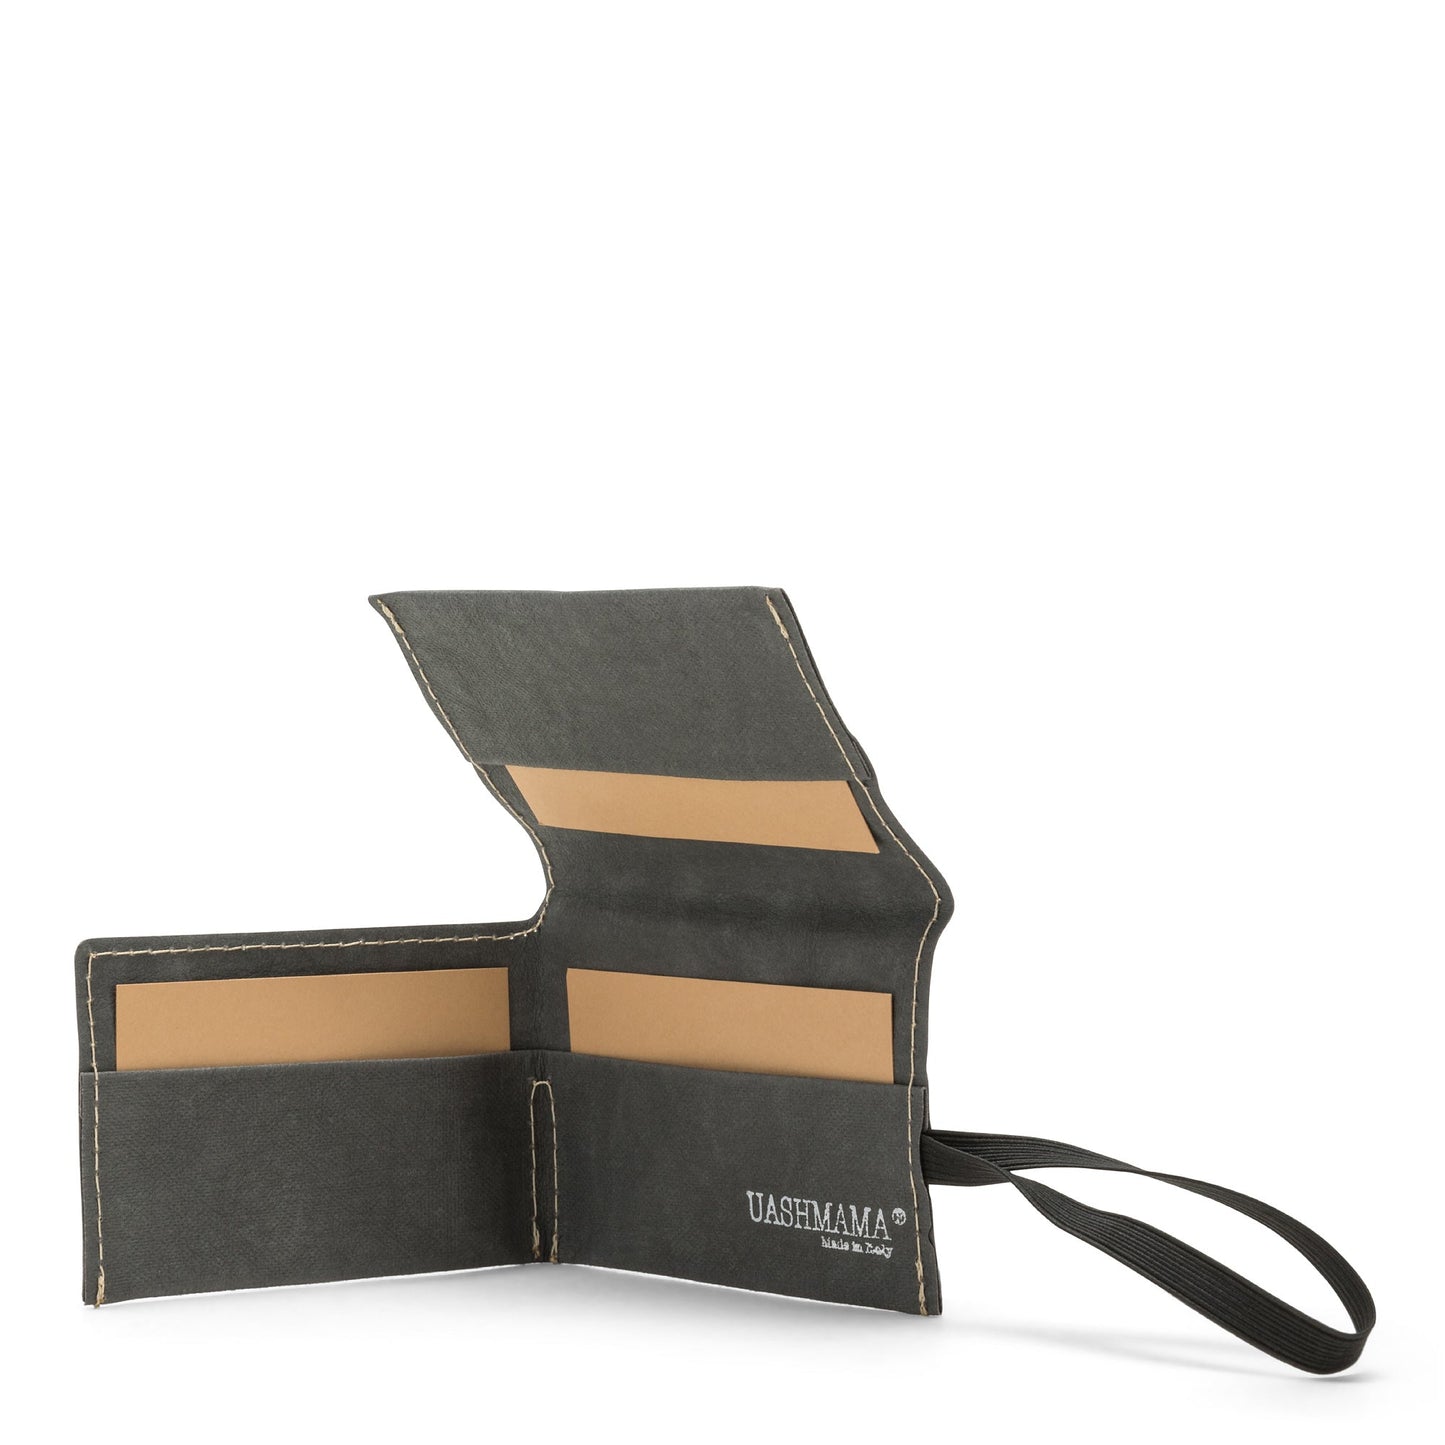 A dark grey washable paper card holder is shown open from the front angle. It features a black elastic side strap and the white UASHMAMA logo stamped on the inside bottom right.